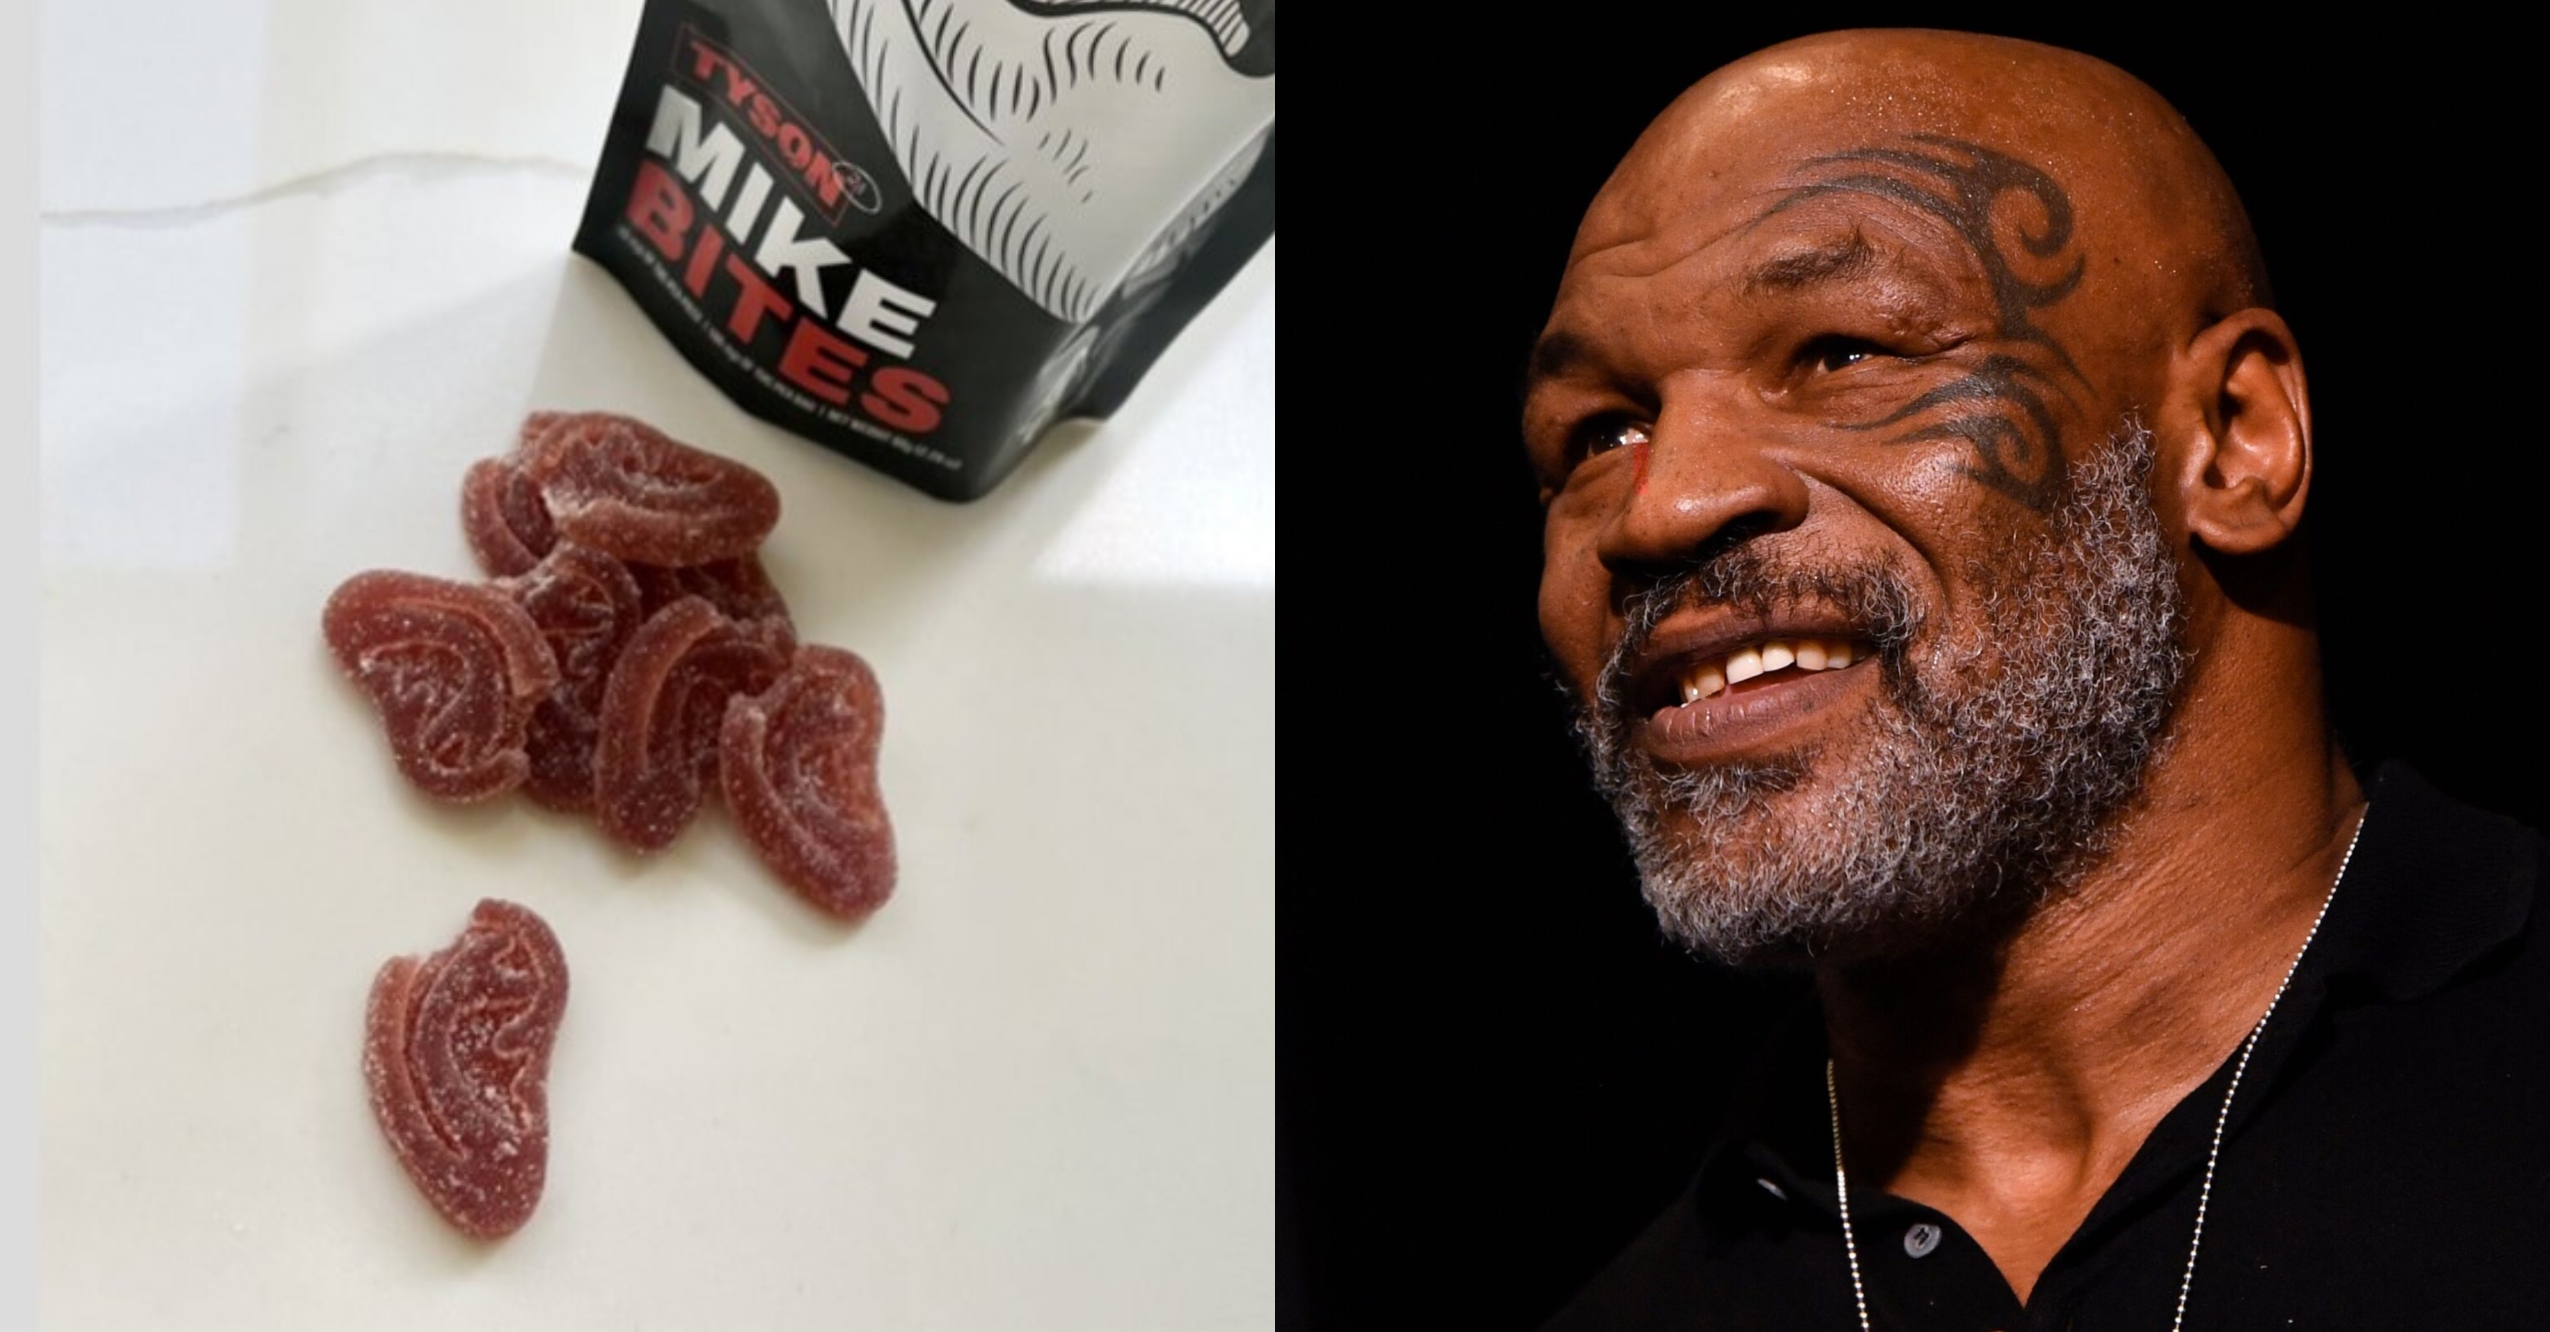 Mike Tyson is selling ear-shaped cannabis-infused edibles called 'Mike  Bites' - KTVZ